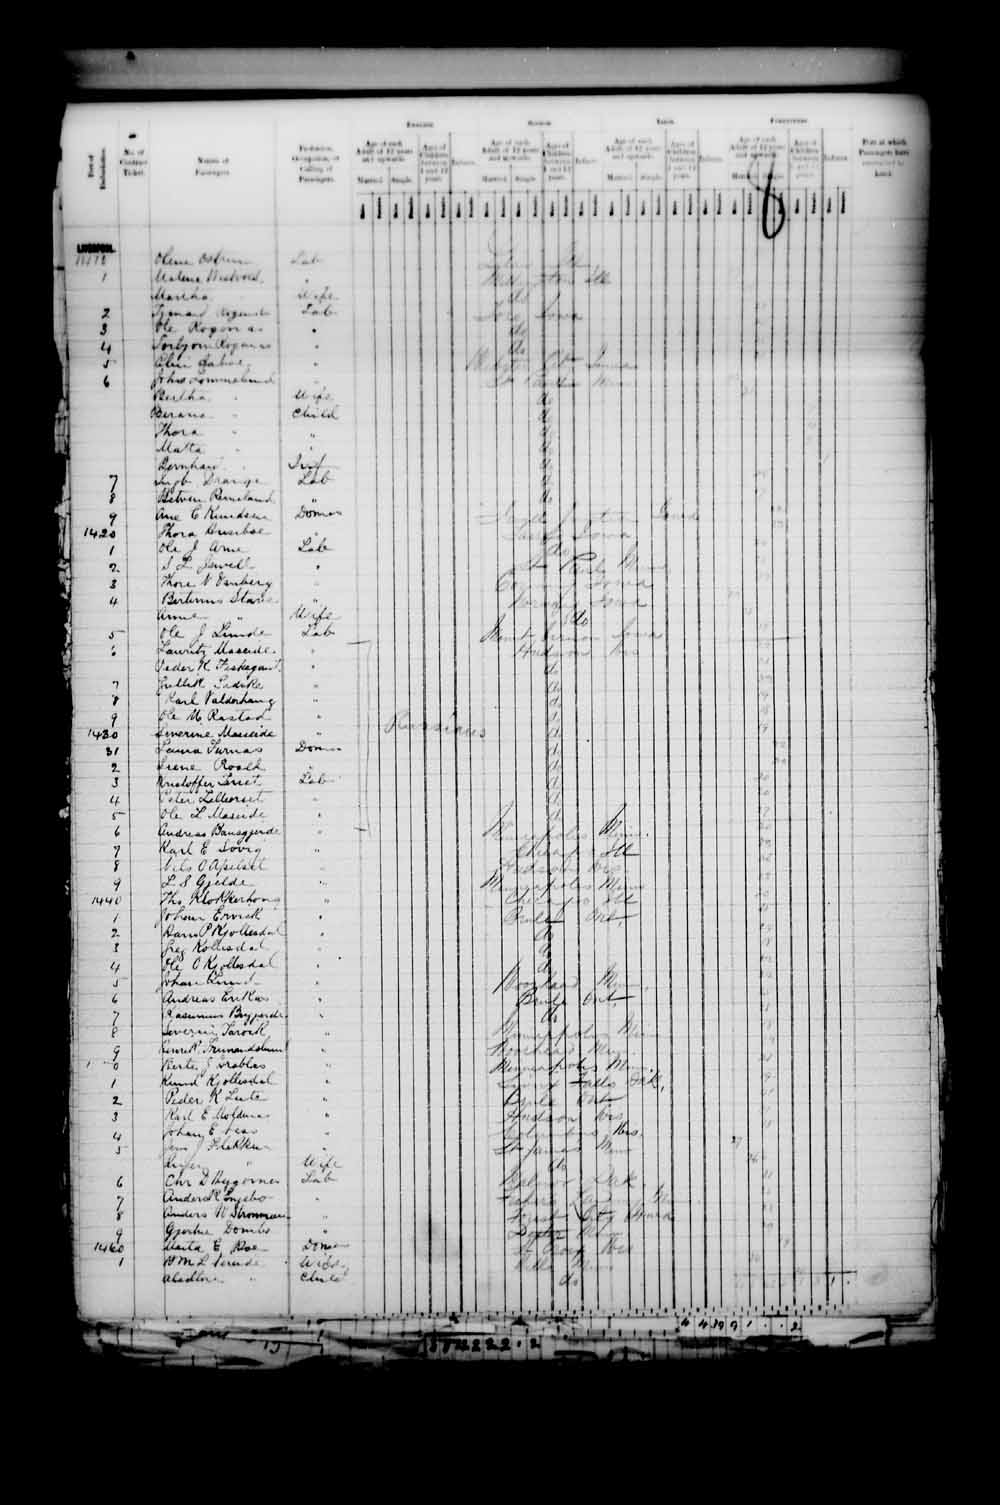 Digitized page of Passenger Lists for Image No.: e003546736